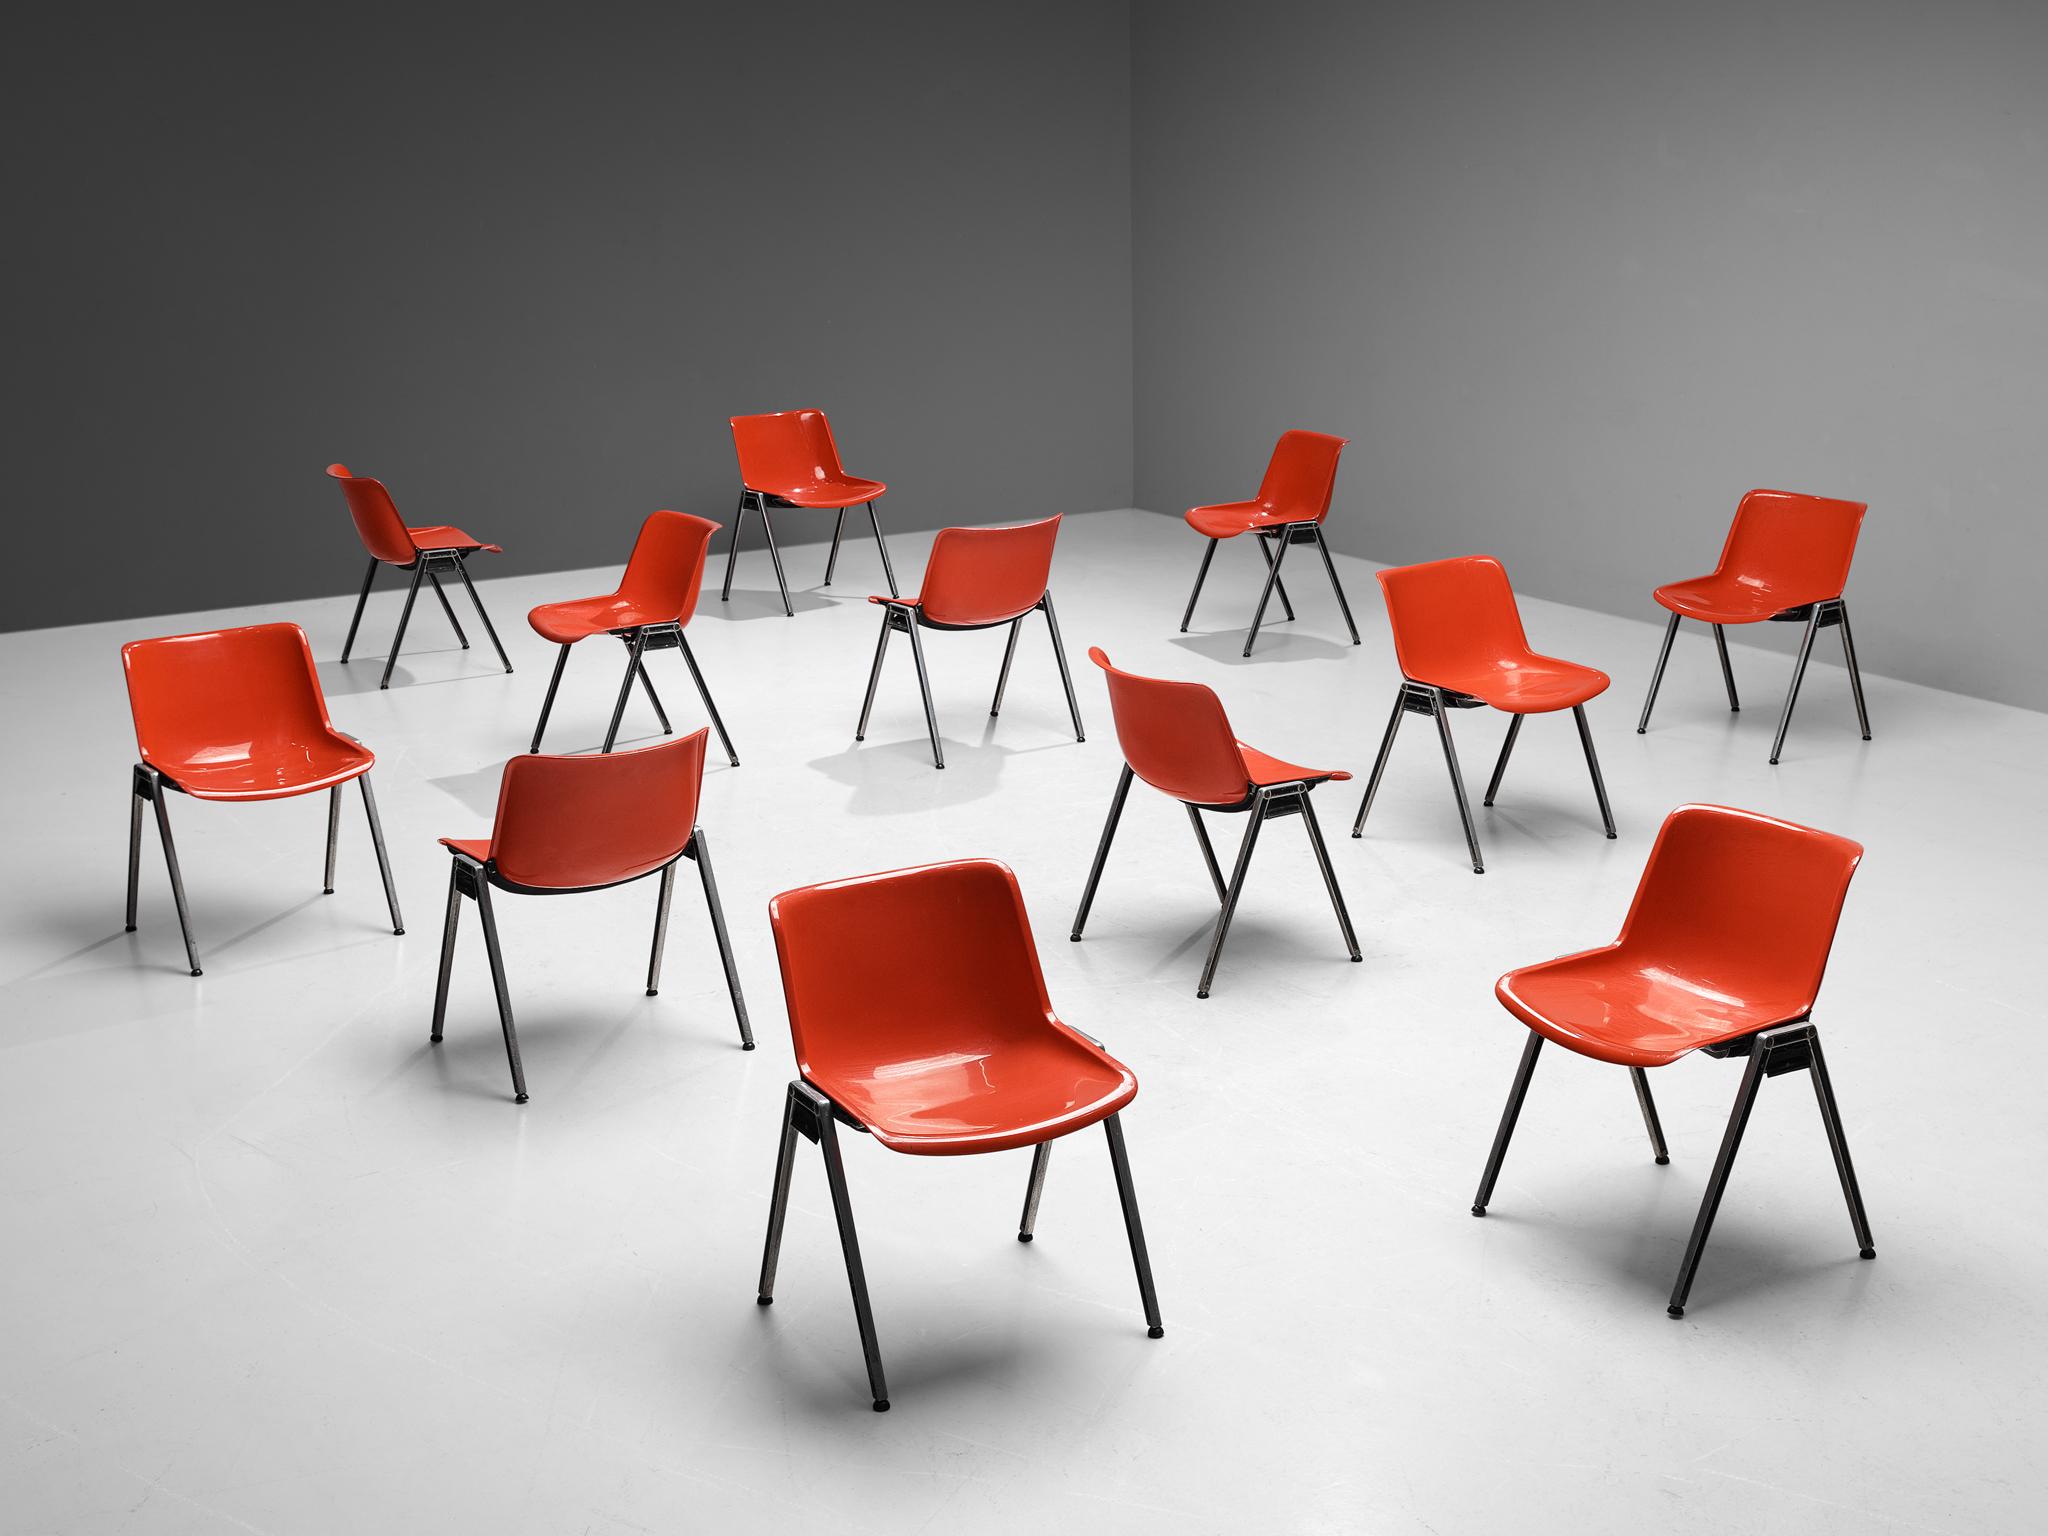 Centro Progetti Tecno, set of twelve stackable chairs model ‘Modus', nylon / plastic, aluminum, metal, Italy, 1970s.

Highly functional chairs designed by Centro Progetti Tecno that are part of the Modus seating system, the first project to initiate